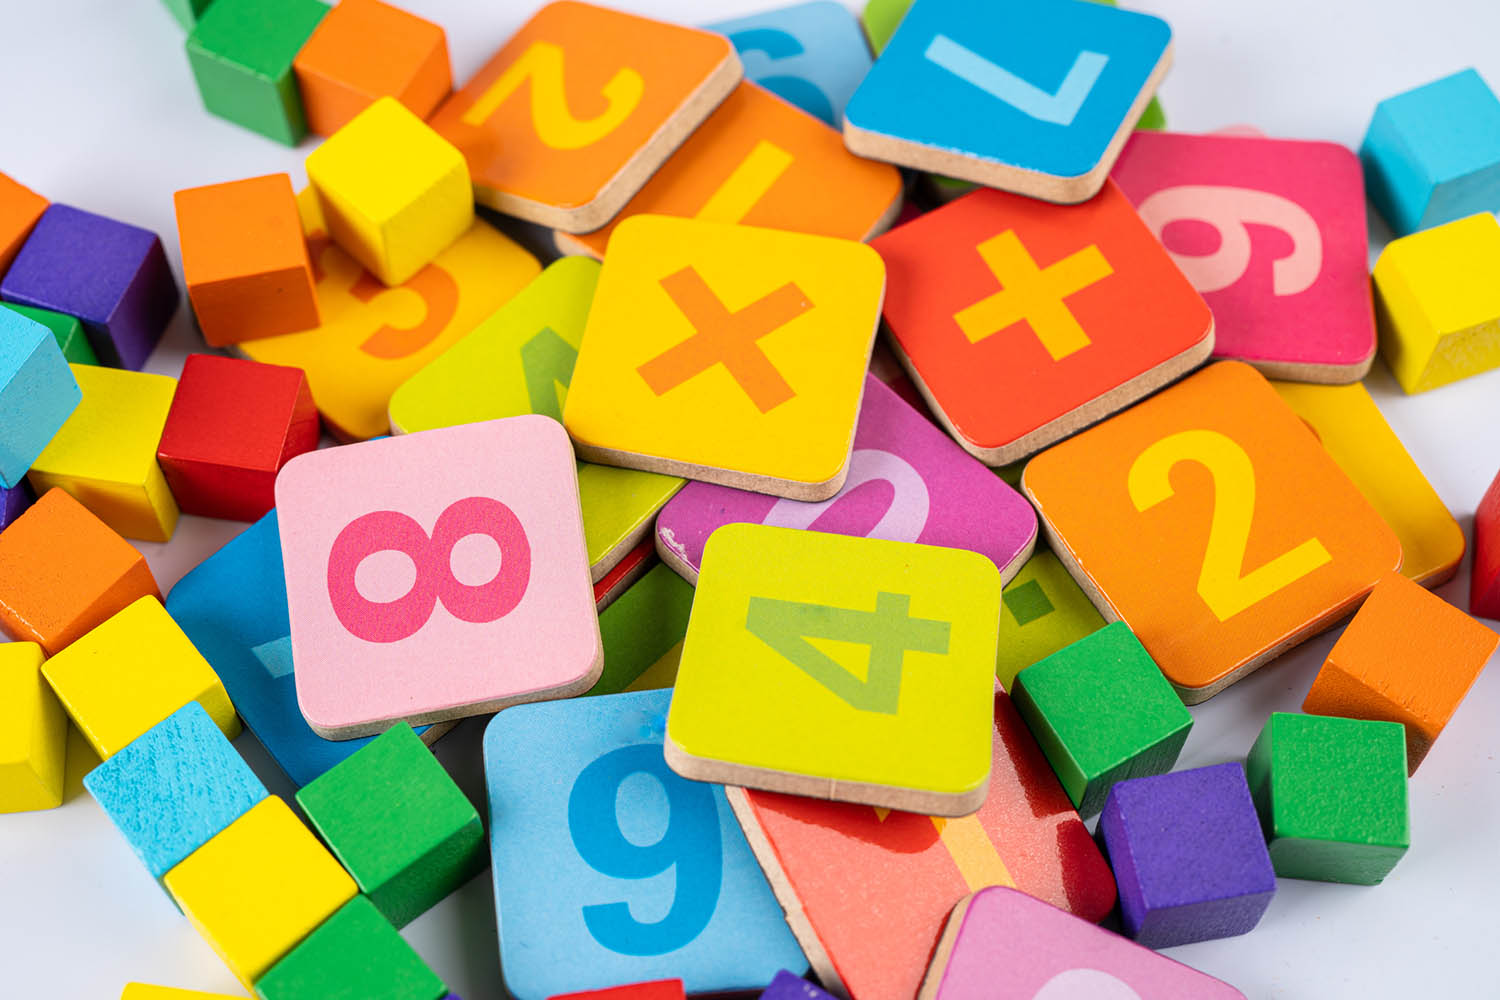 Brightly colored number tiles